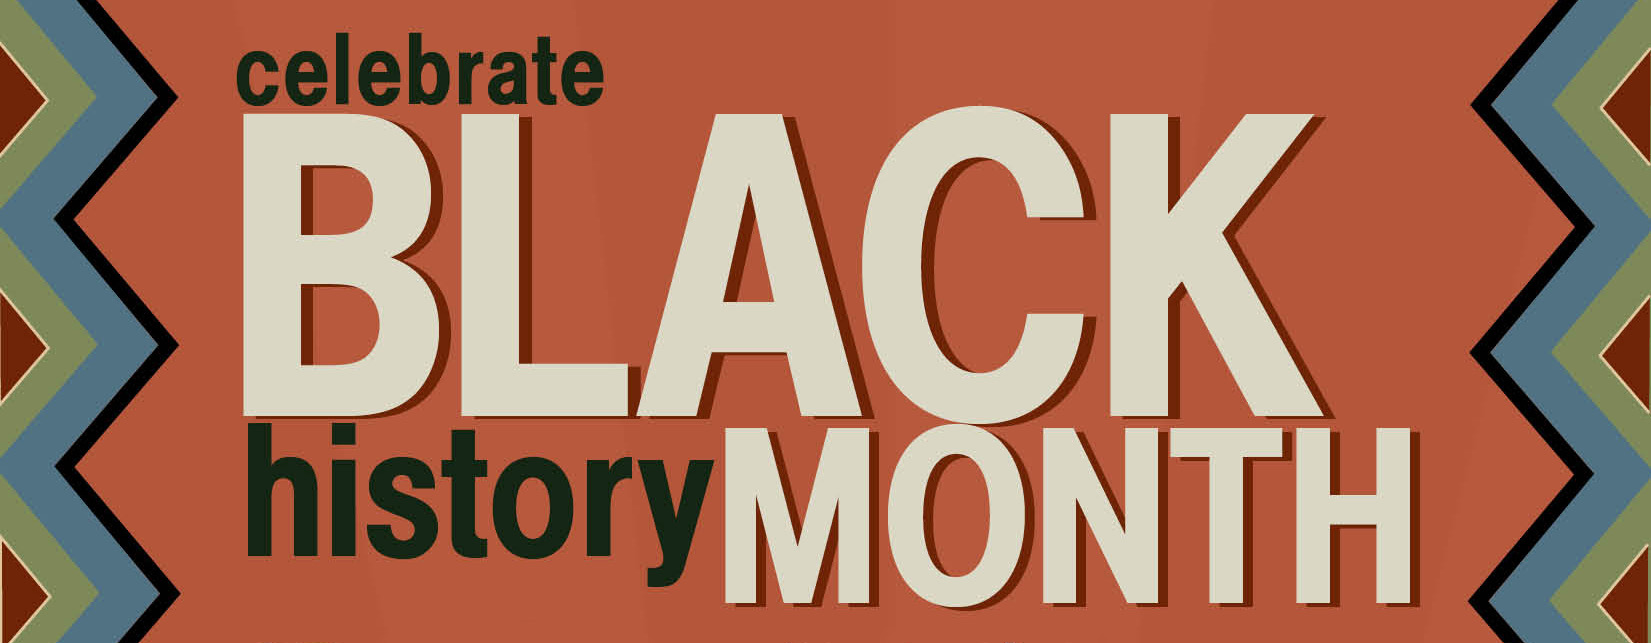 A text graphic that reads "Celebrate Black History Month."